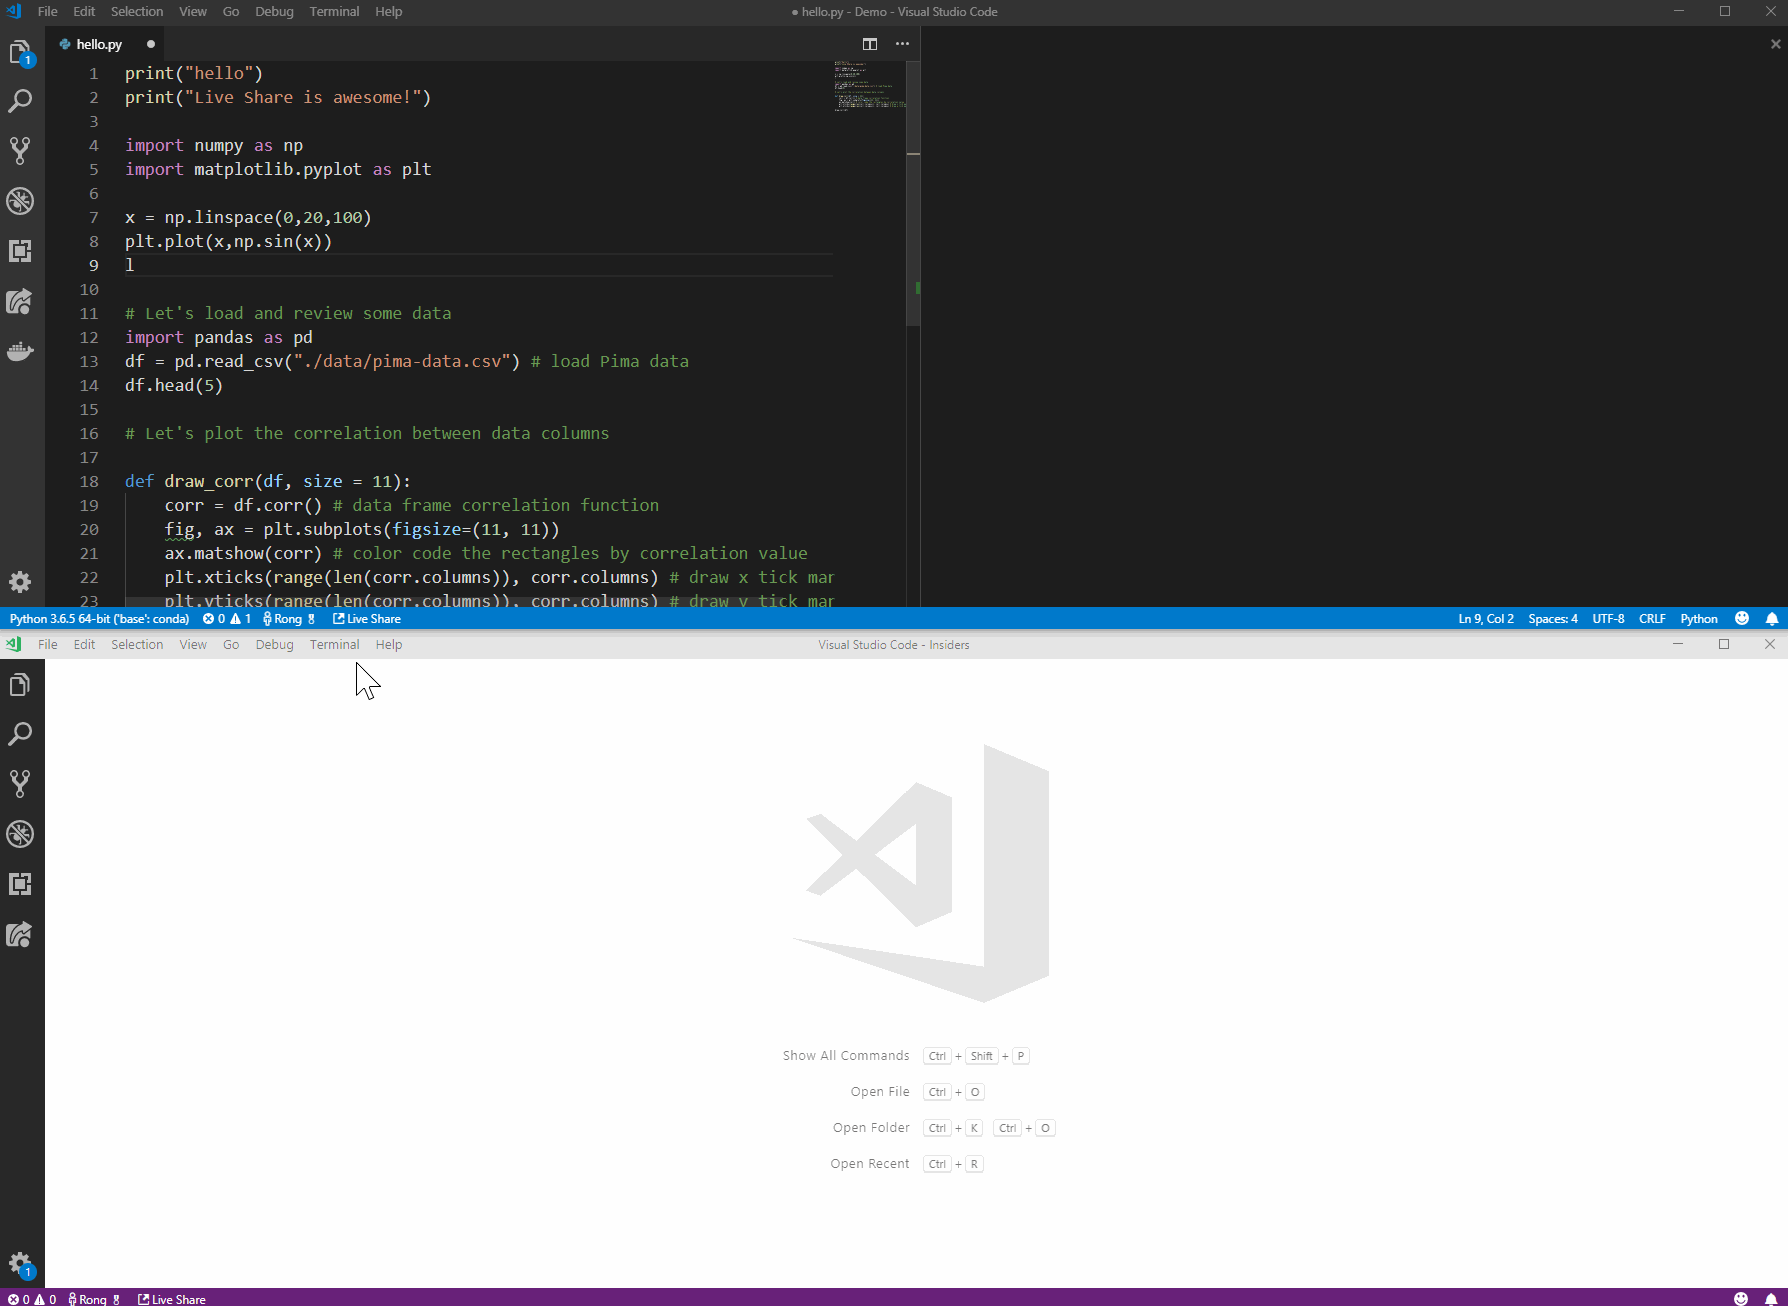 Live Share for the Python Interactive window